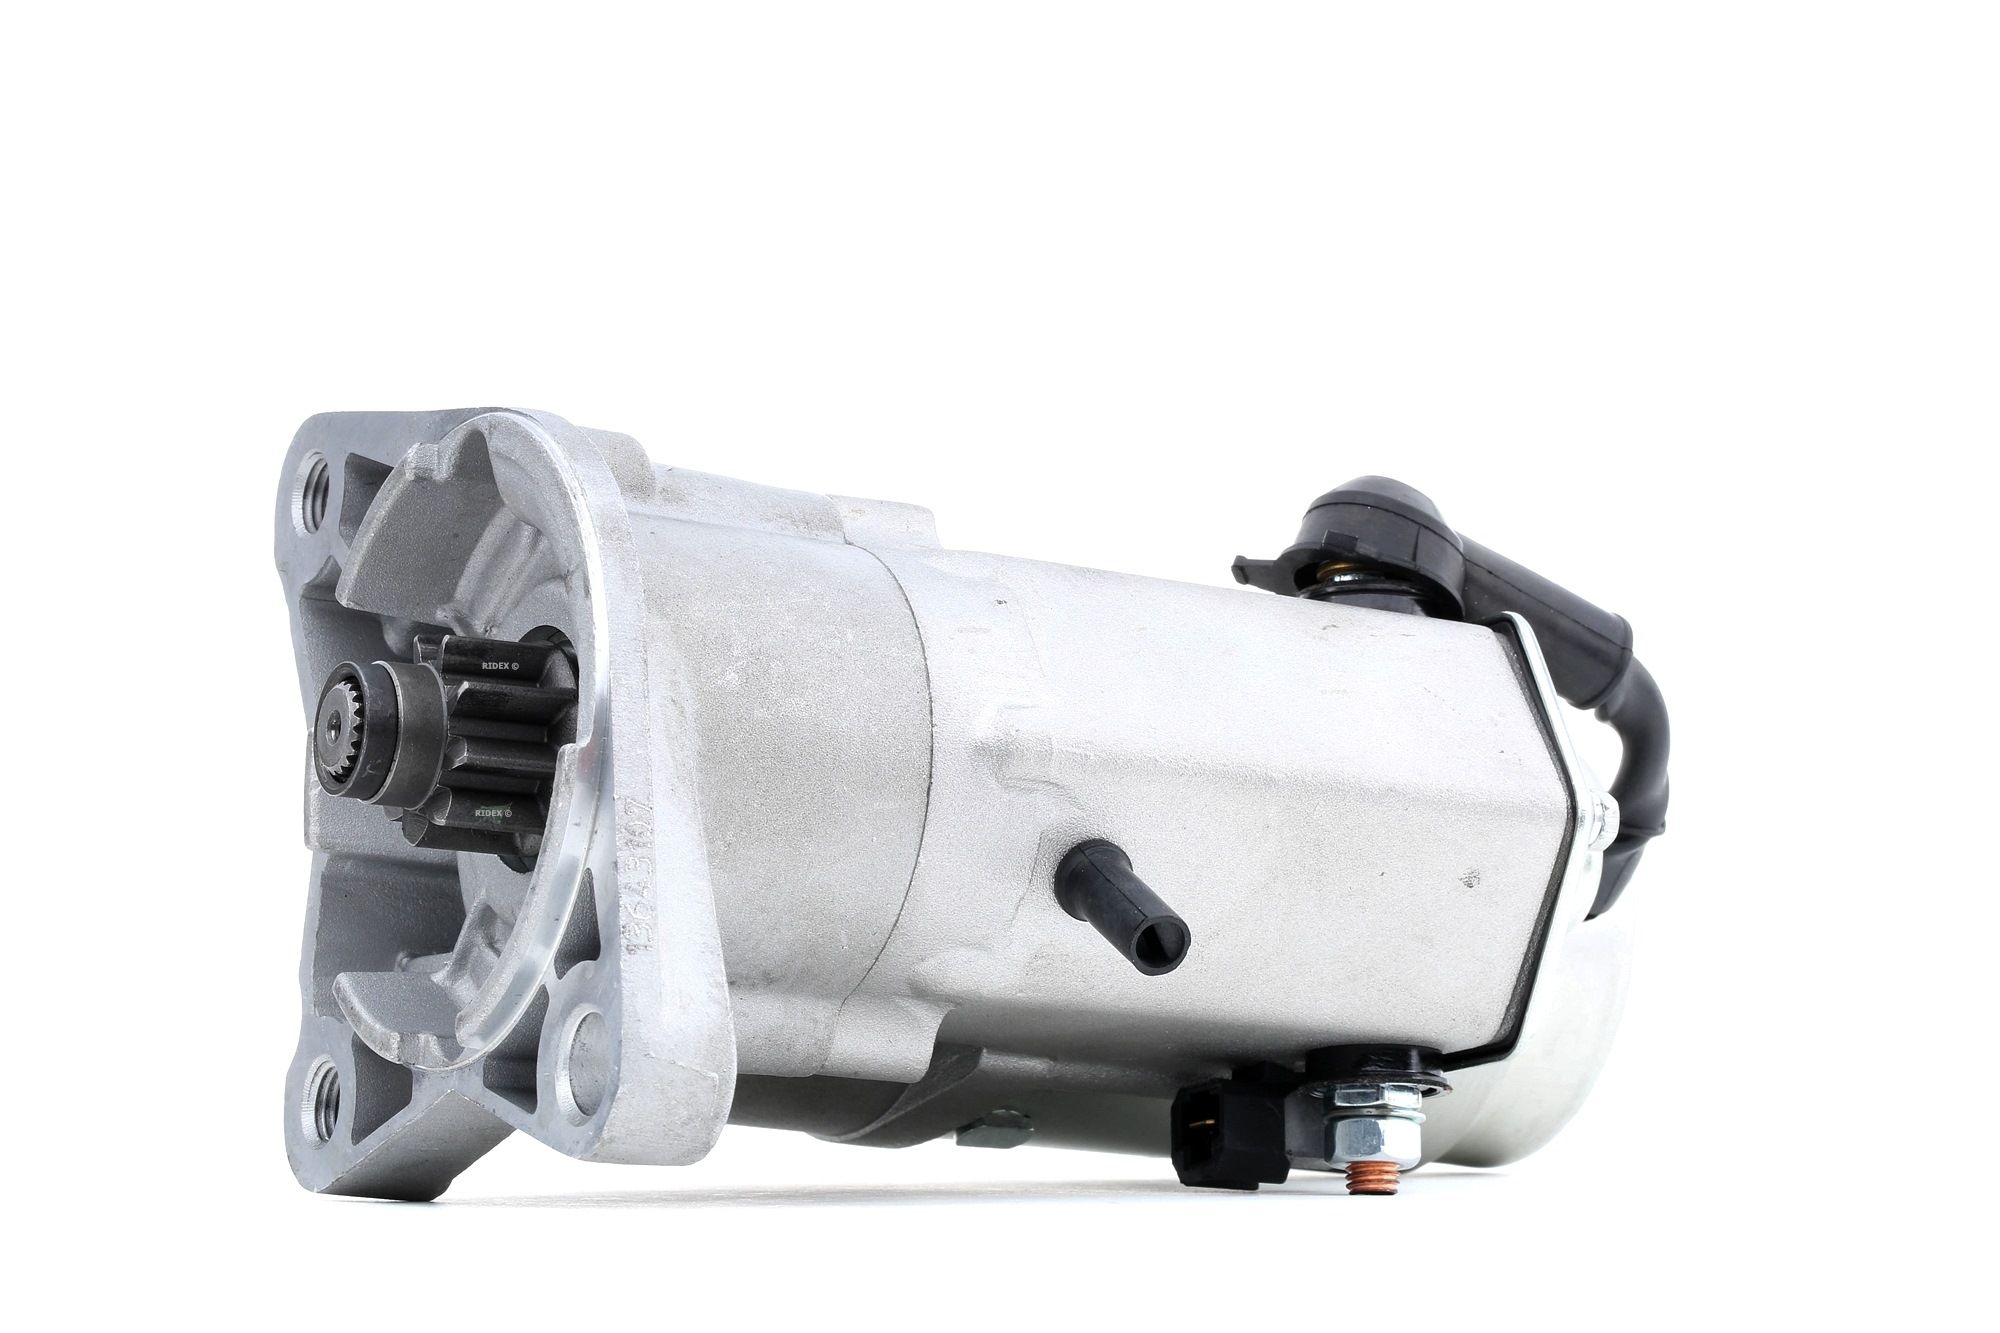 RIDEX 2S0195 Starter motor 12V, 2kW, Number of Teeth: 9,10, with 50(Jet) clamp, Ø 88 mm